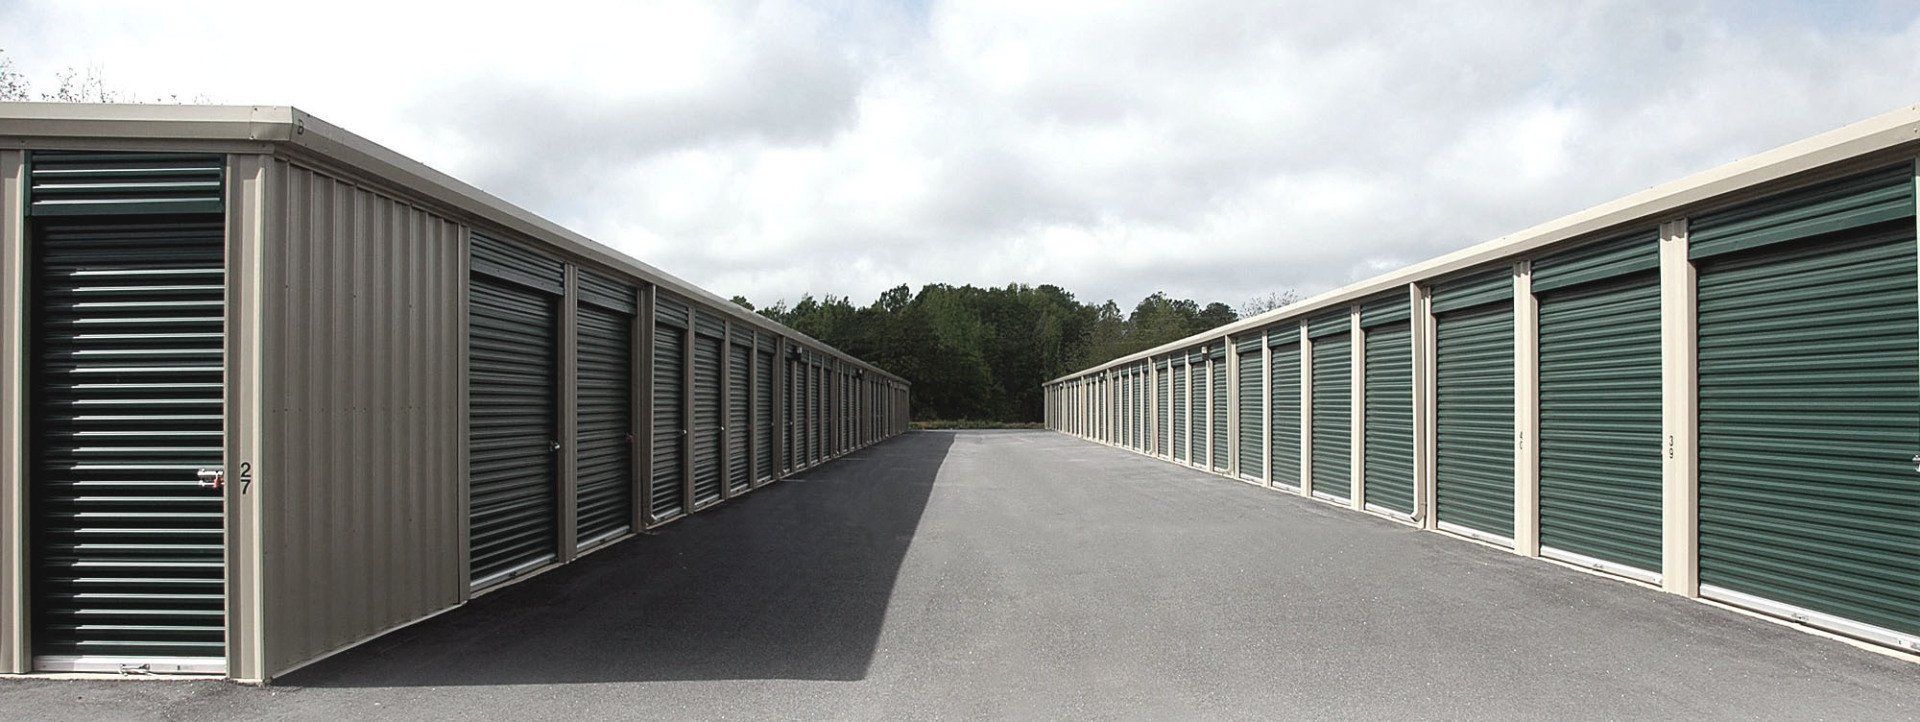 Row of commercial storage